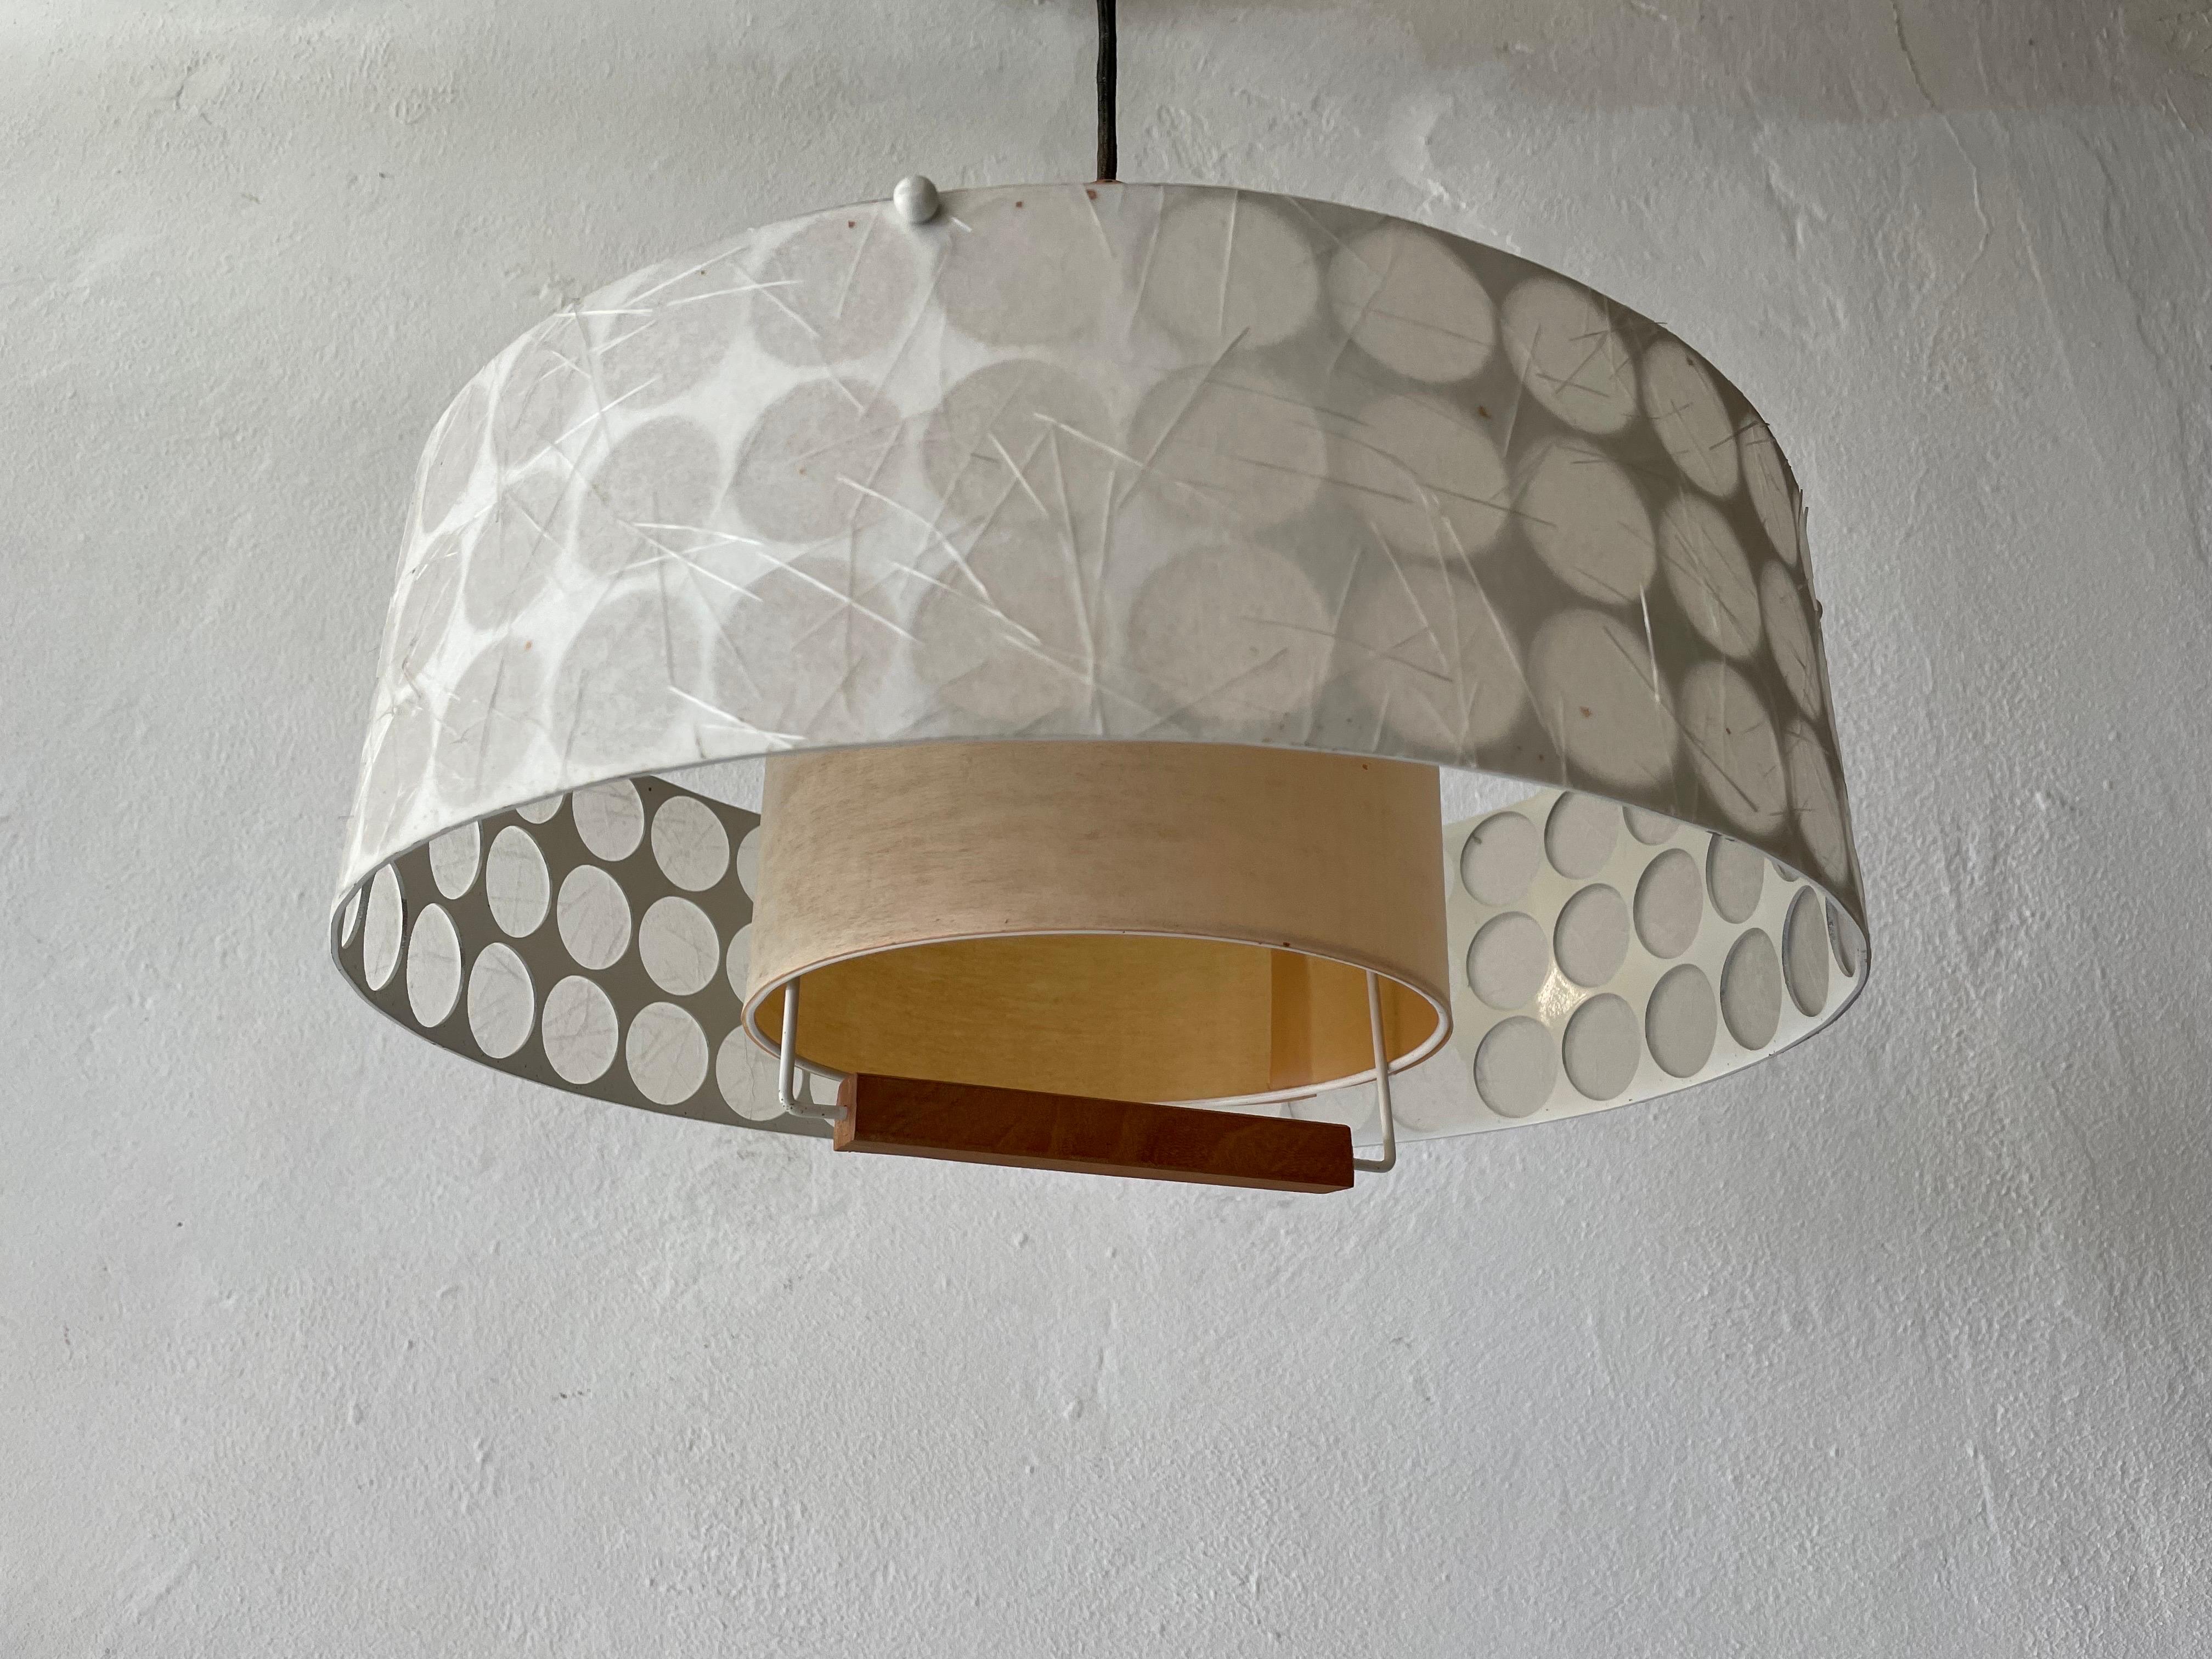 Rare Atomic Shade Pendant Lamp by Temde, 1960s, Switzerland For Sale 2